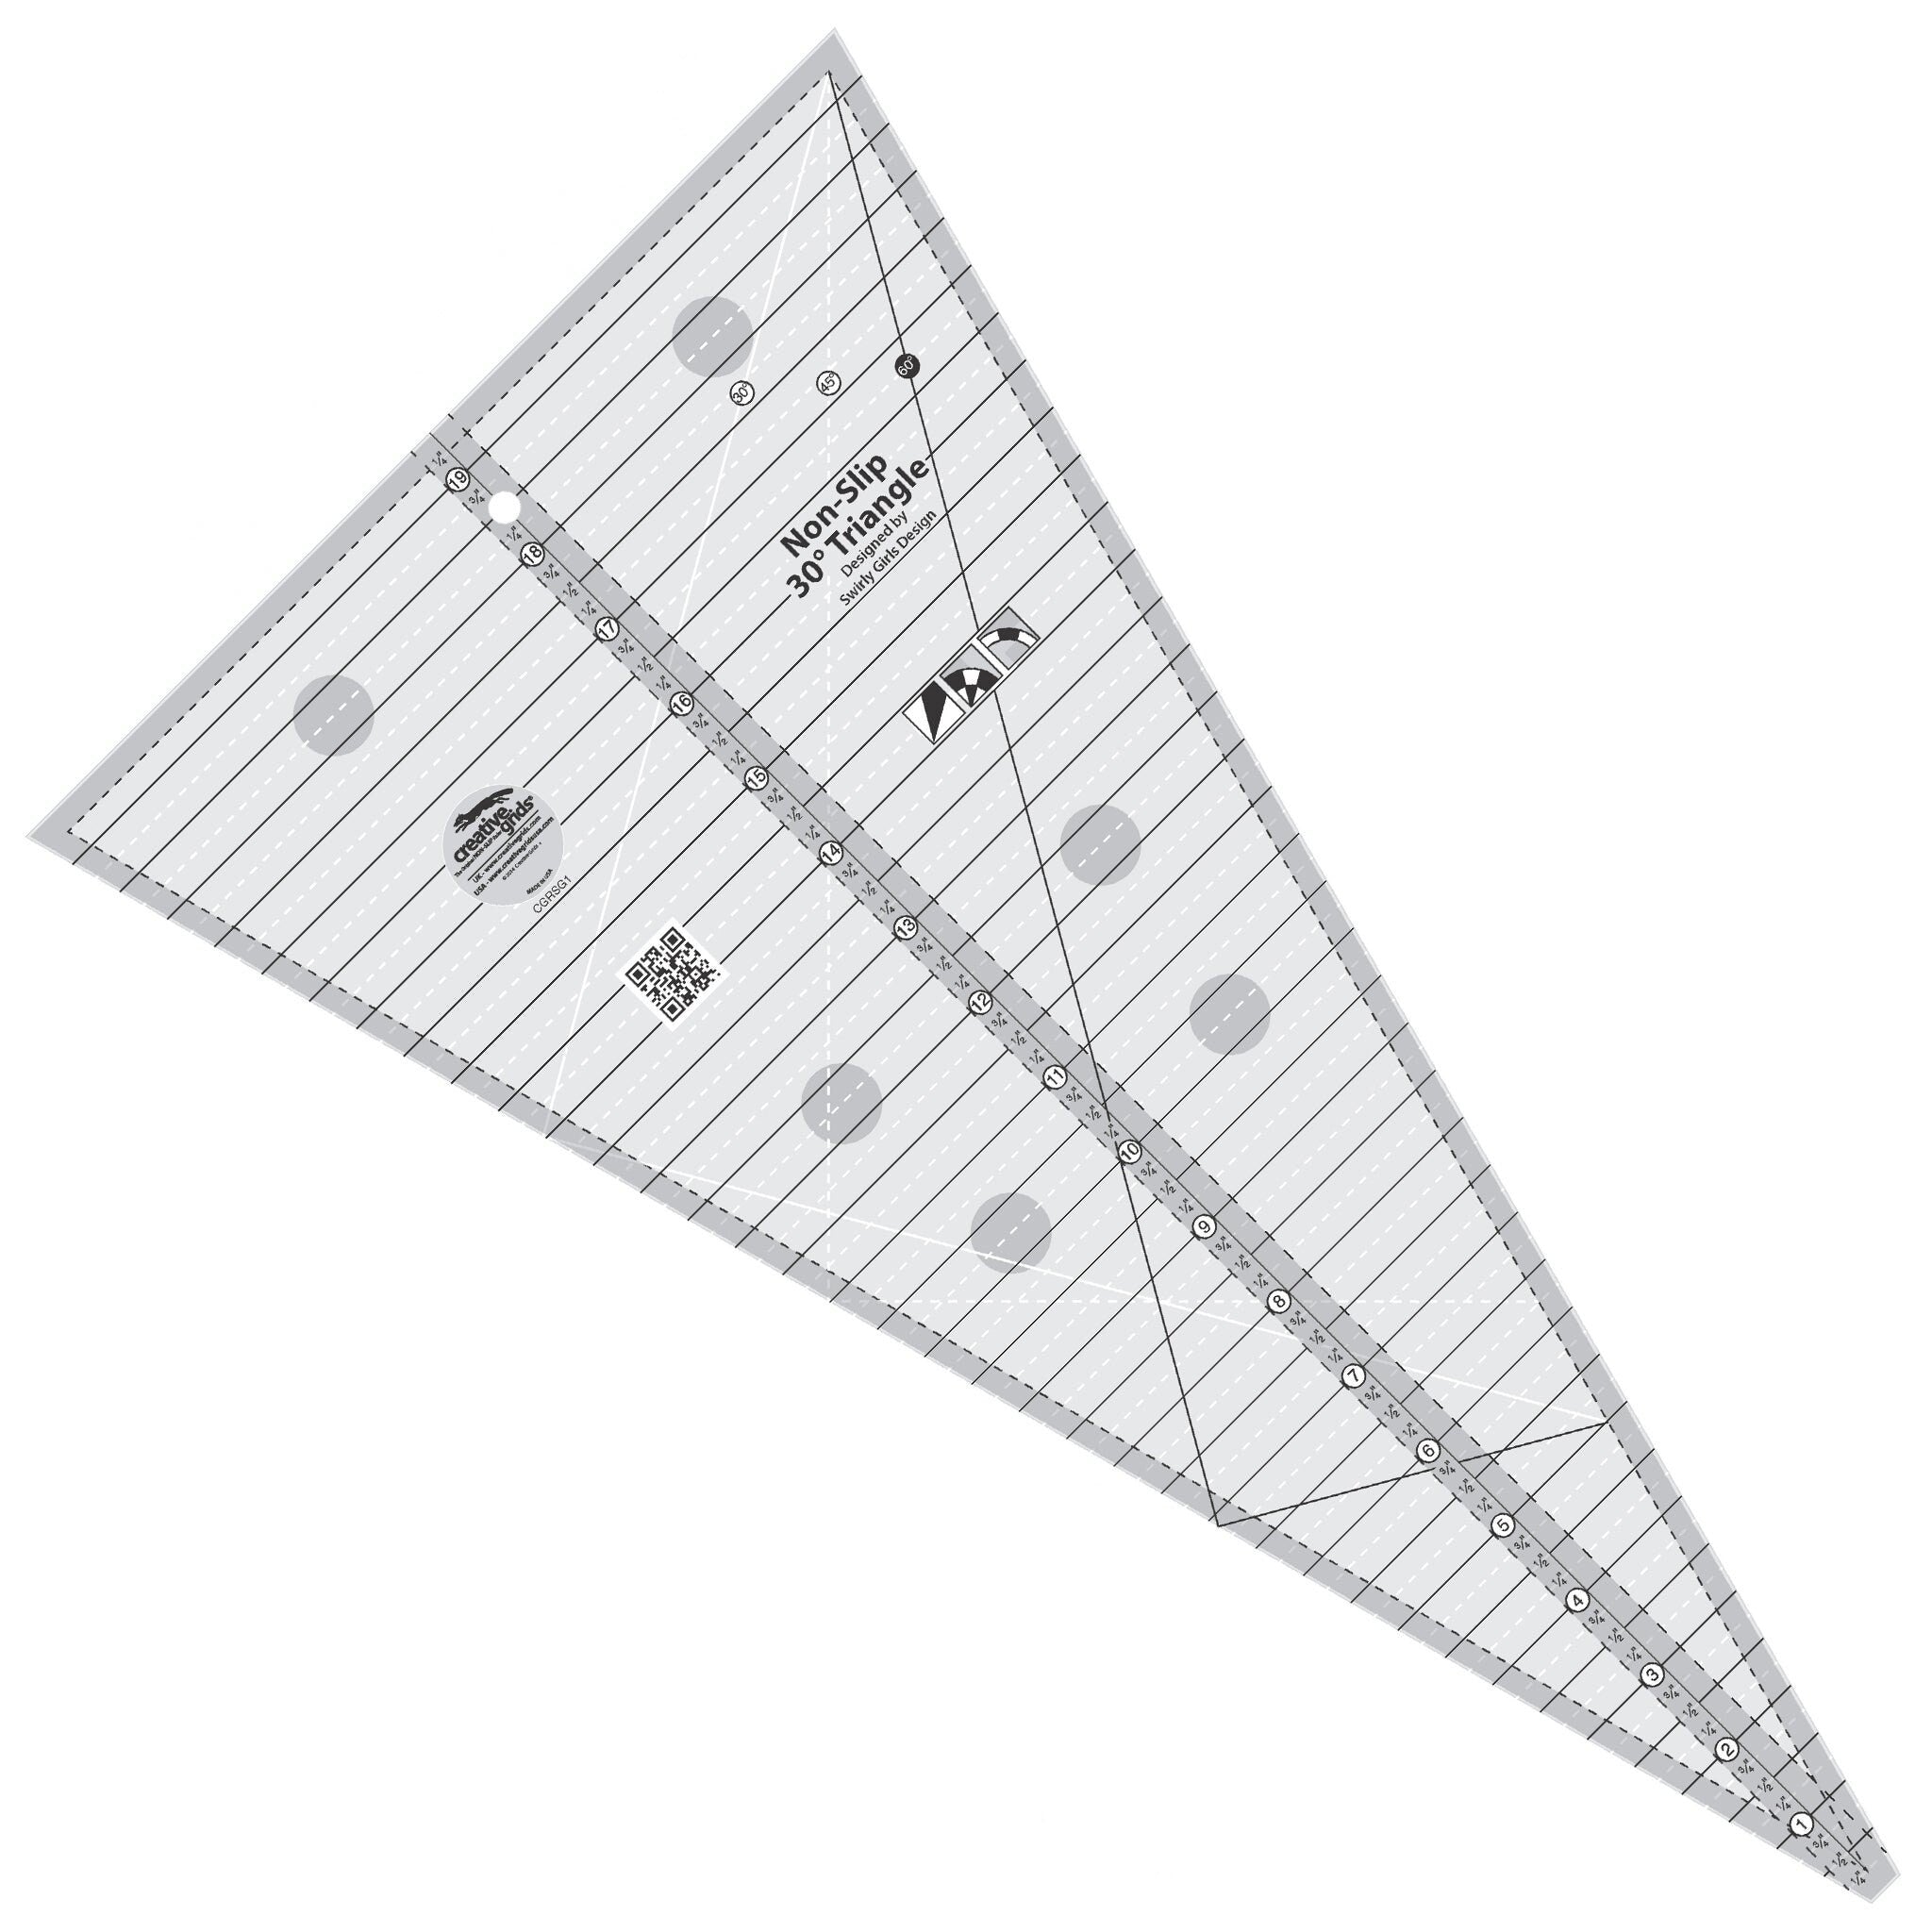 Creative Grids 30 Degree 10-3/4-Inch x 19-1/2-Inch Triangle Quilt Ruler (CGRSG1)